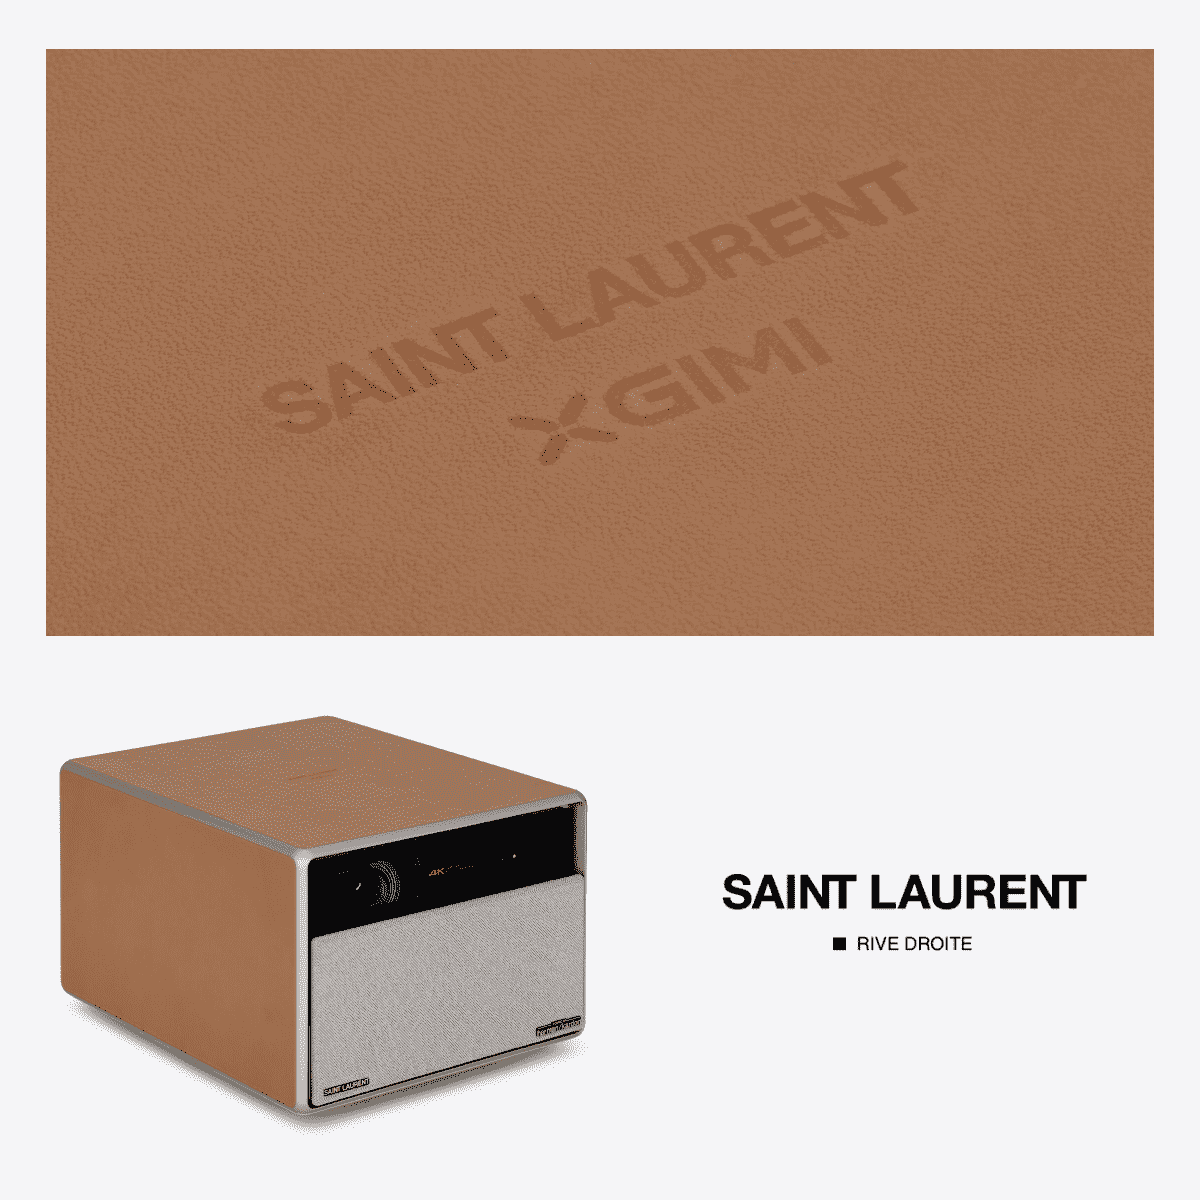 Saint Laurent Rive Droite and XGIMI Special Collaboration of HORIZON Ultra